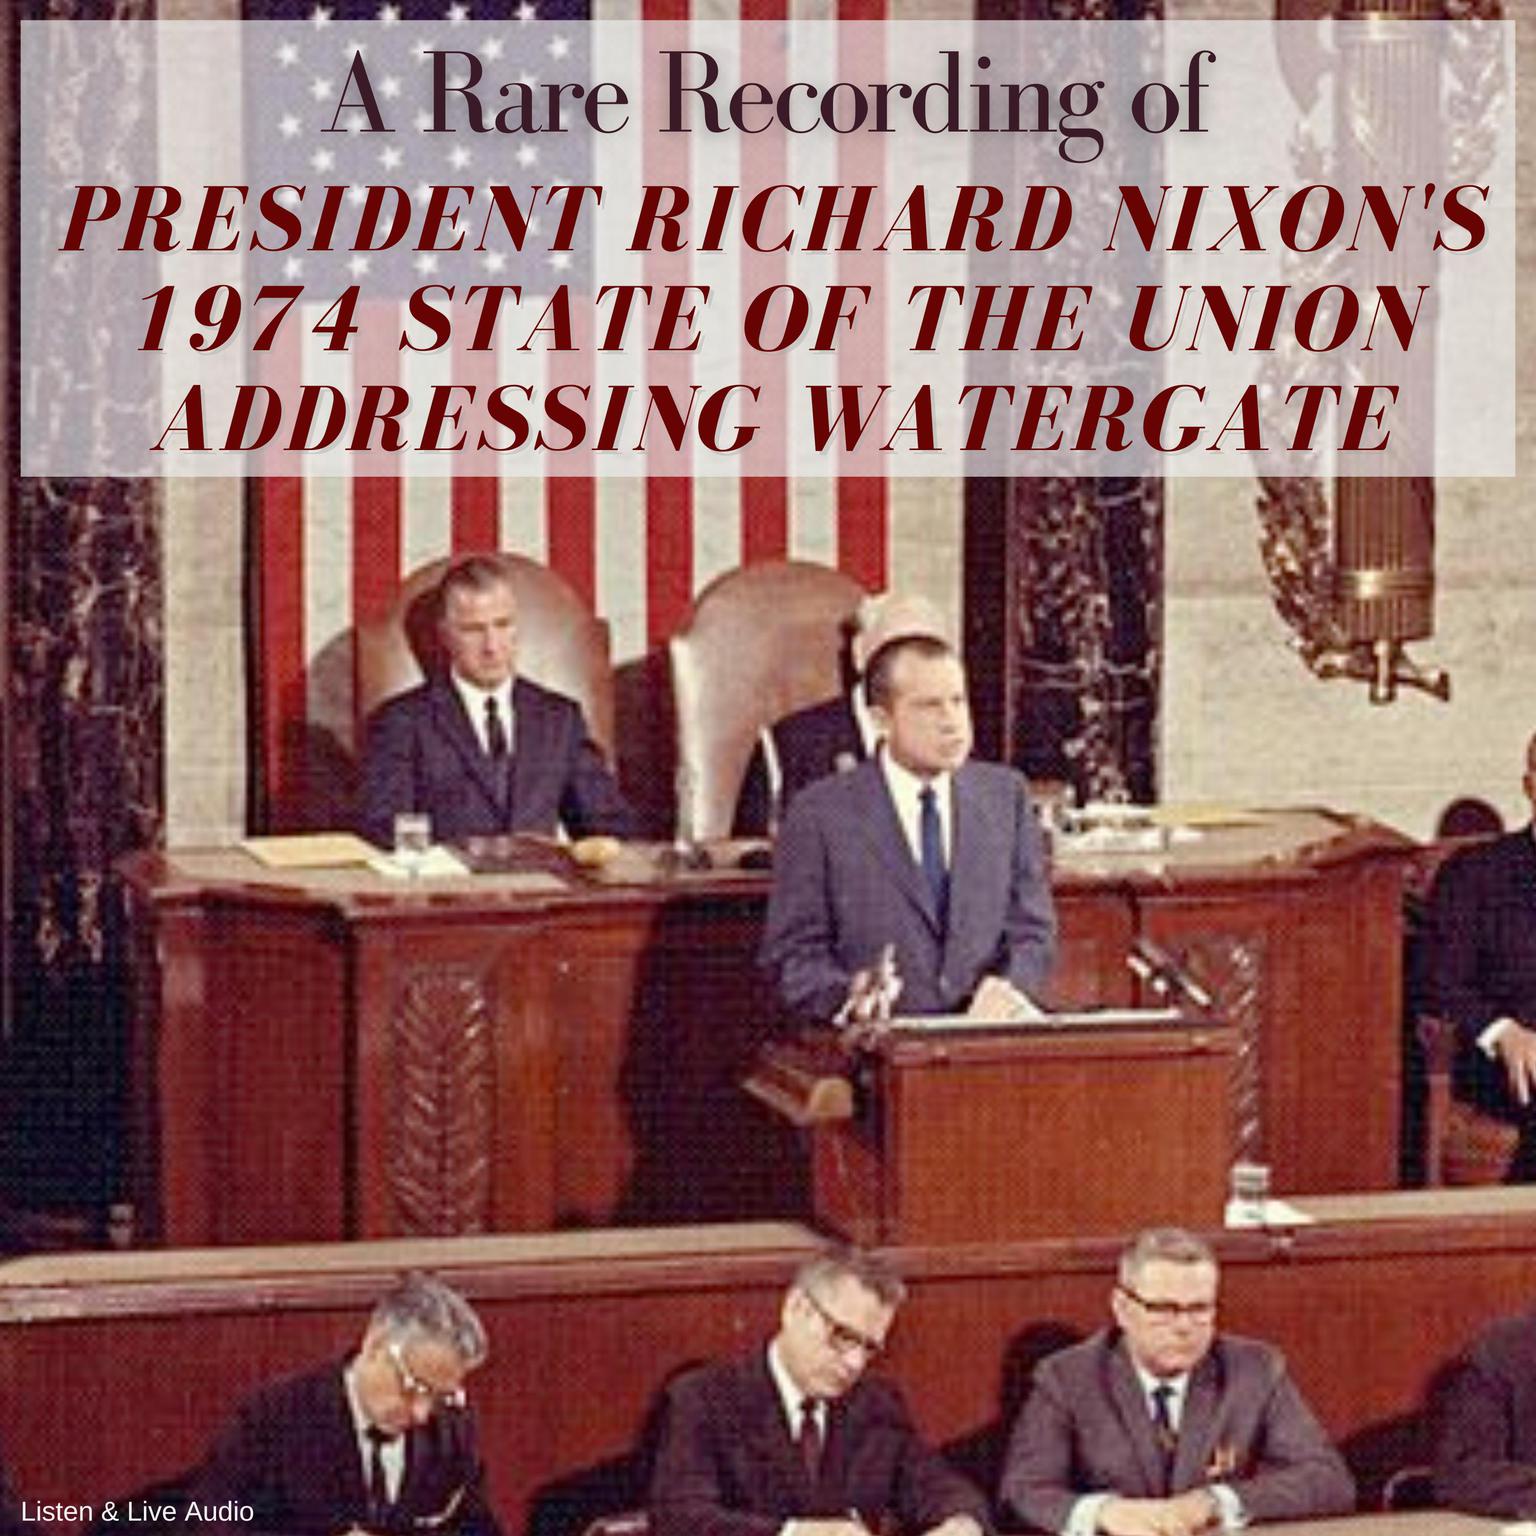 A Rare Recording of President Richard Nixon’s 1974 State of the Union Addressing Watergate Audiobook, by Richard Nixon